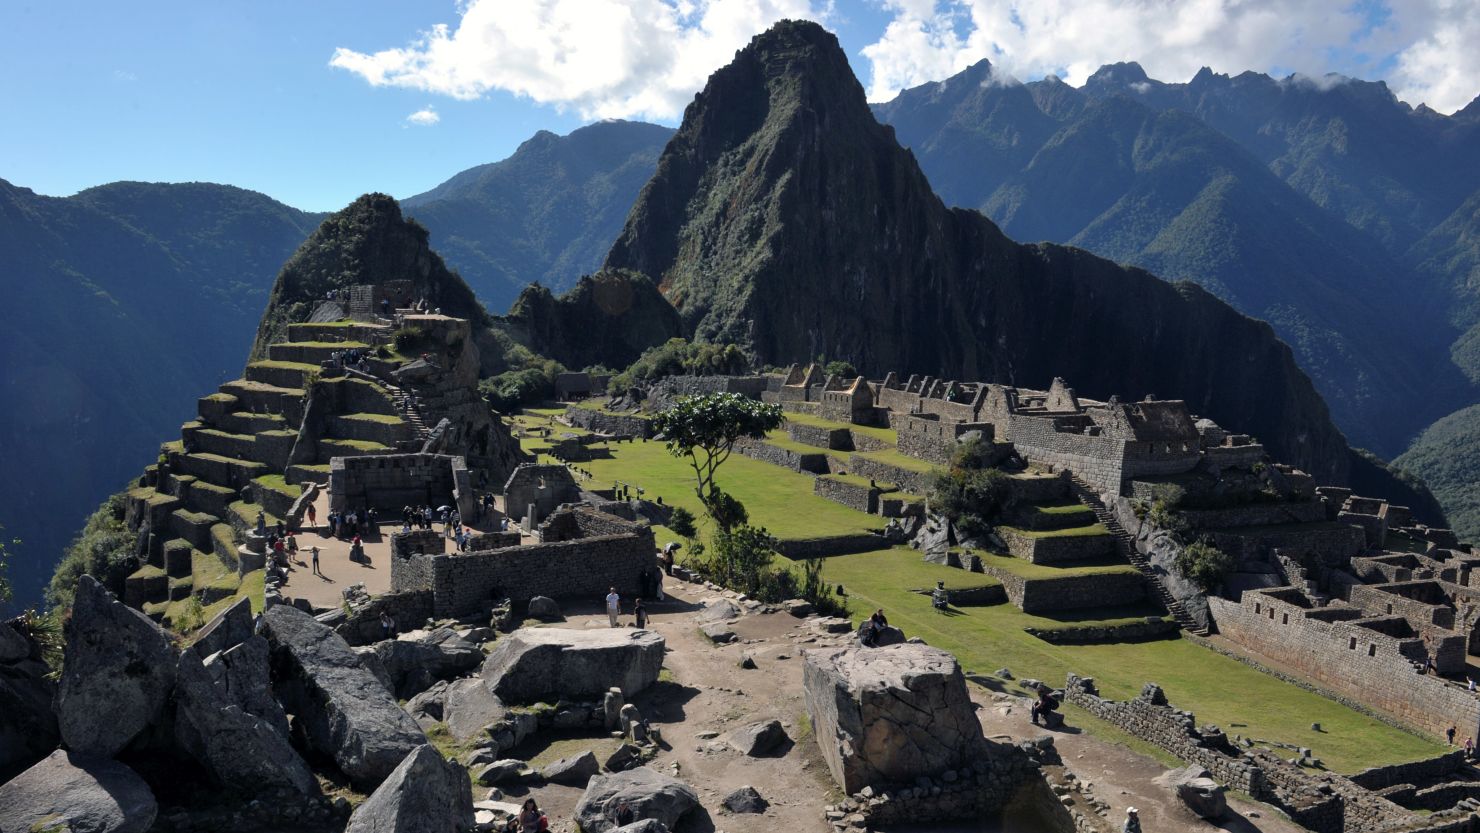 A rash of "naked tourism" at Macchu Pichu, Peru's top tourist destination, has raised the ire of officials.